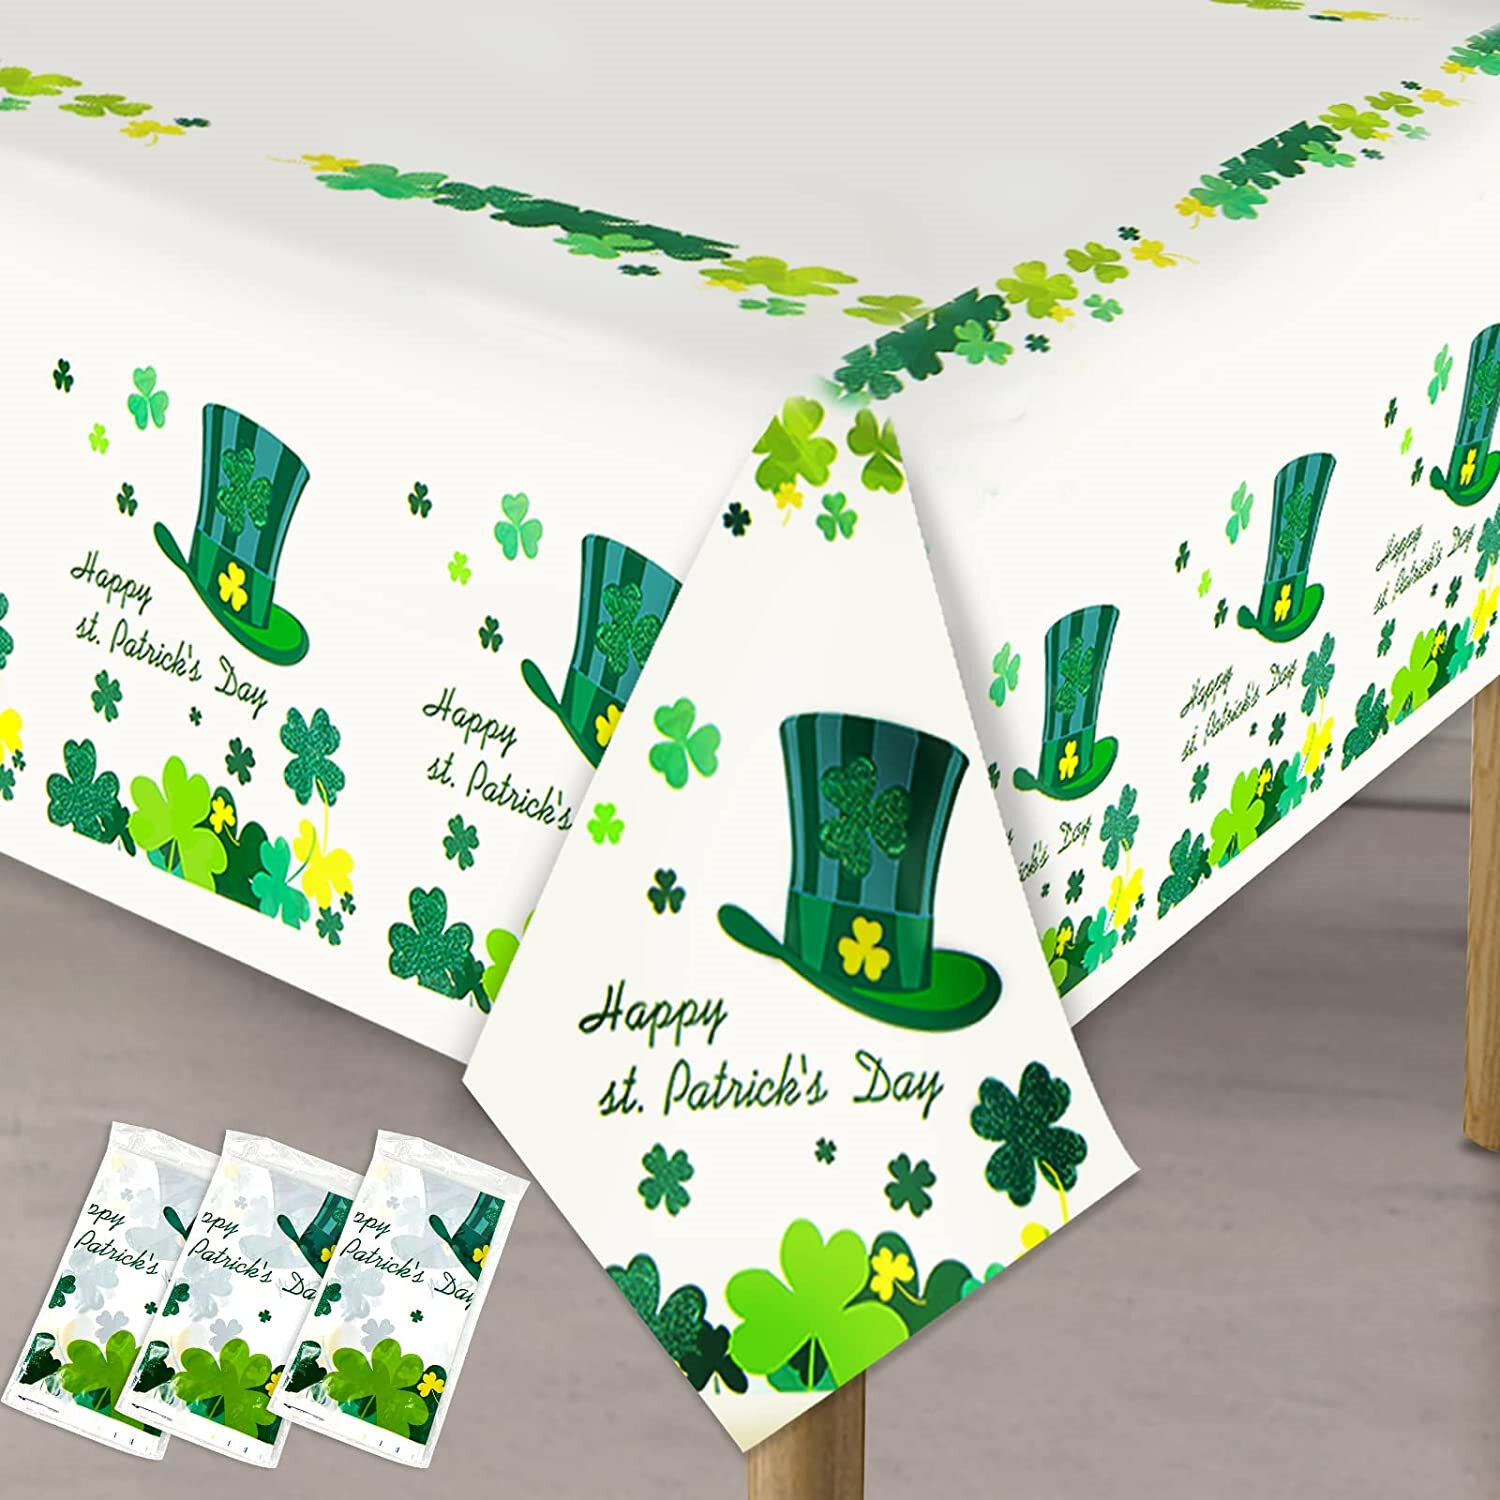 ST PATRICK'S DAY CLOVER PLASTIC TABLE COVER ~ Party Supplies Decorations Green 